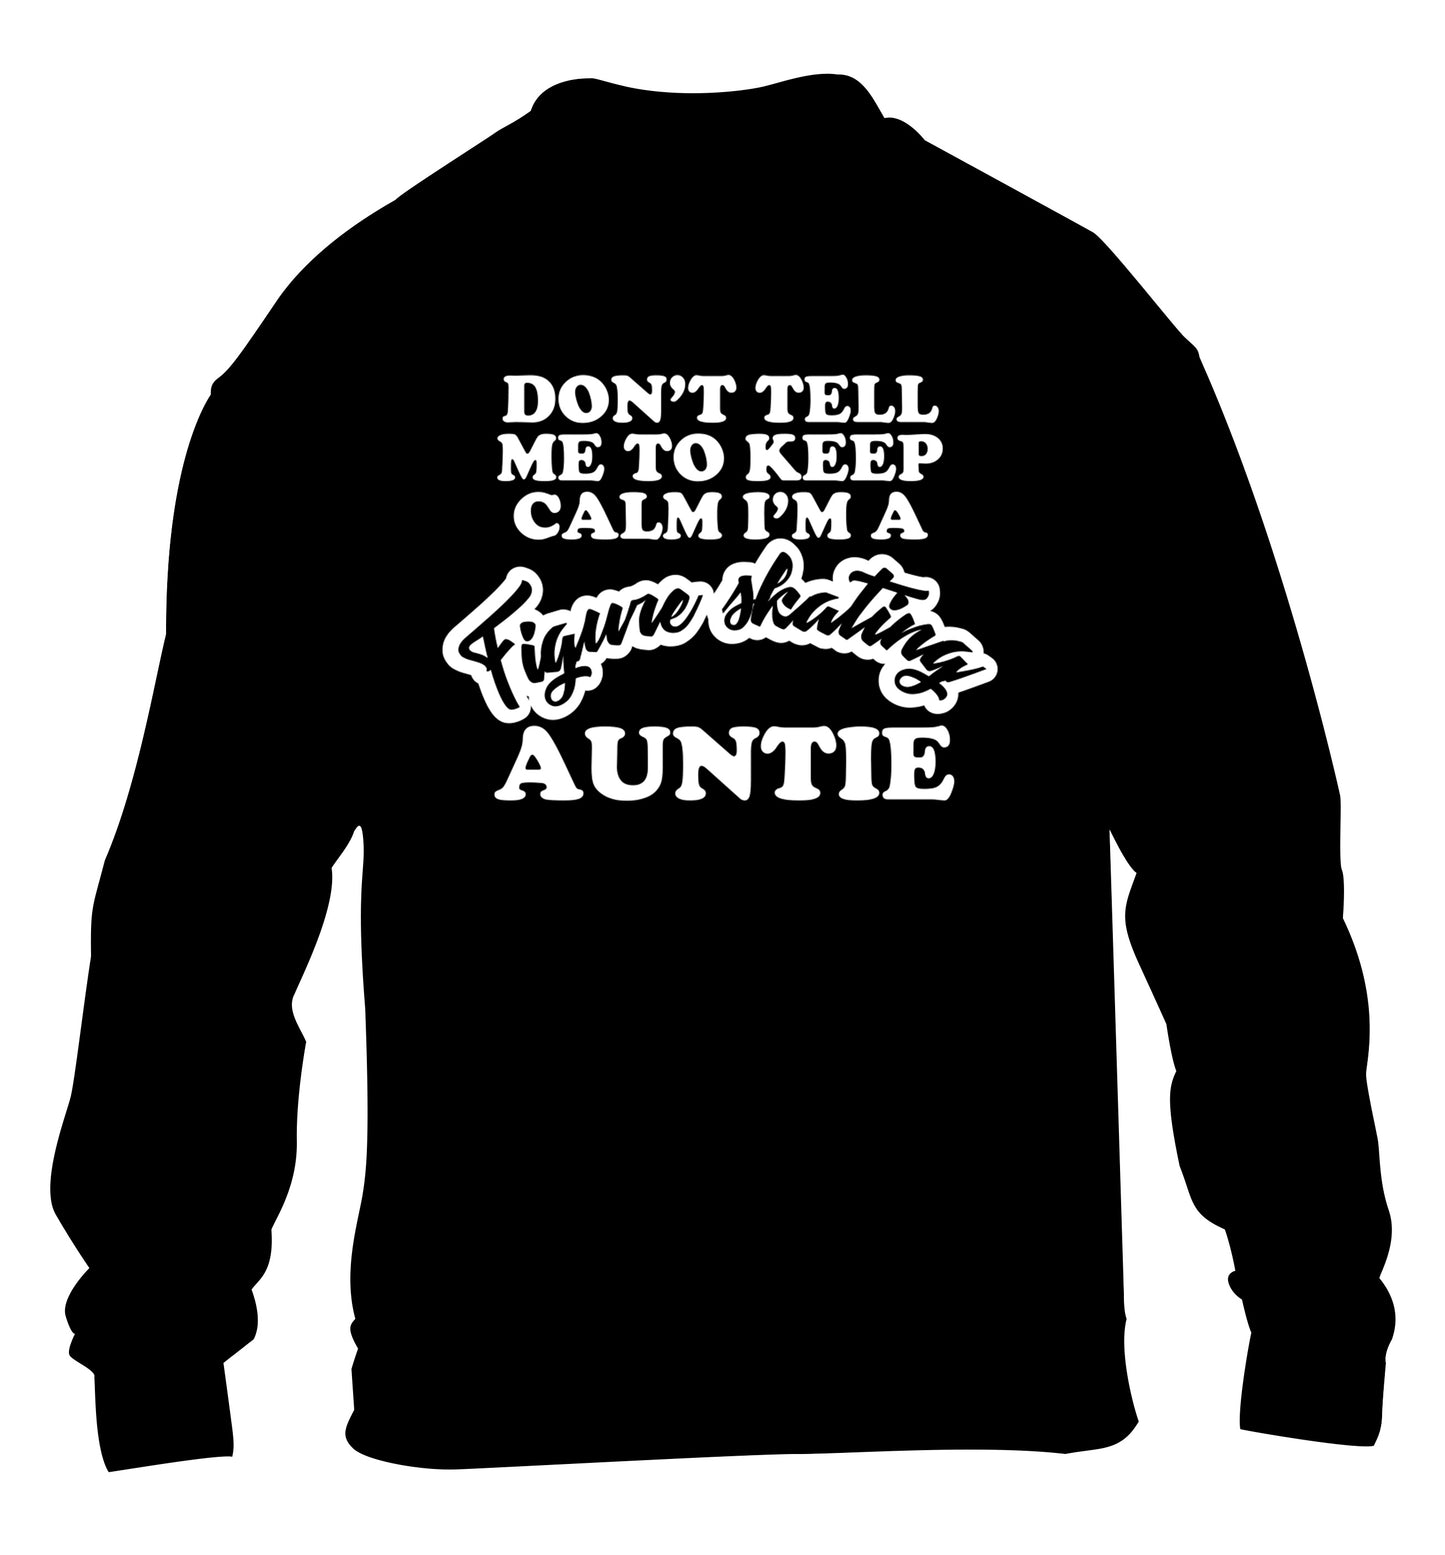 Don't tell me to keep calm I'm a figure skating auntie children's black sweater 12-14 Years